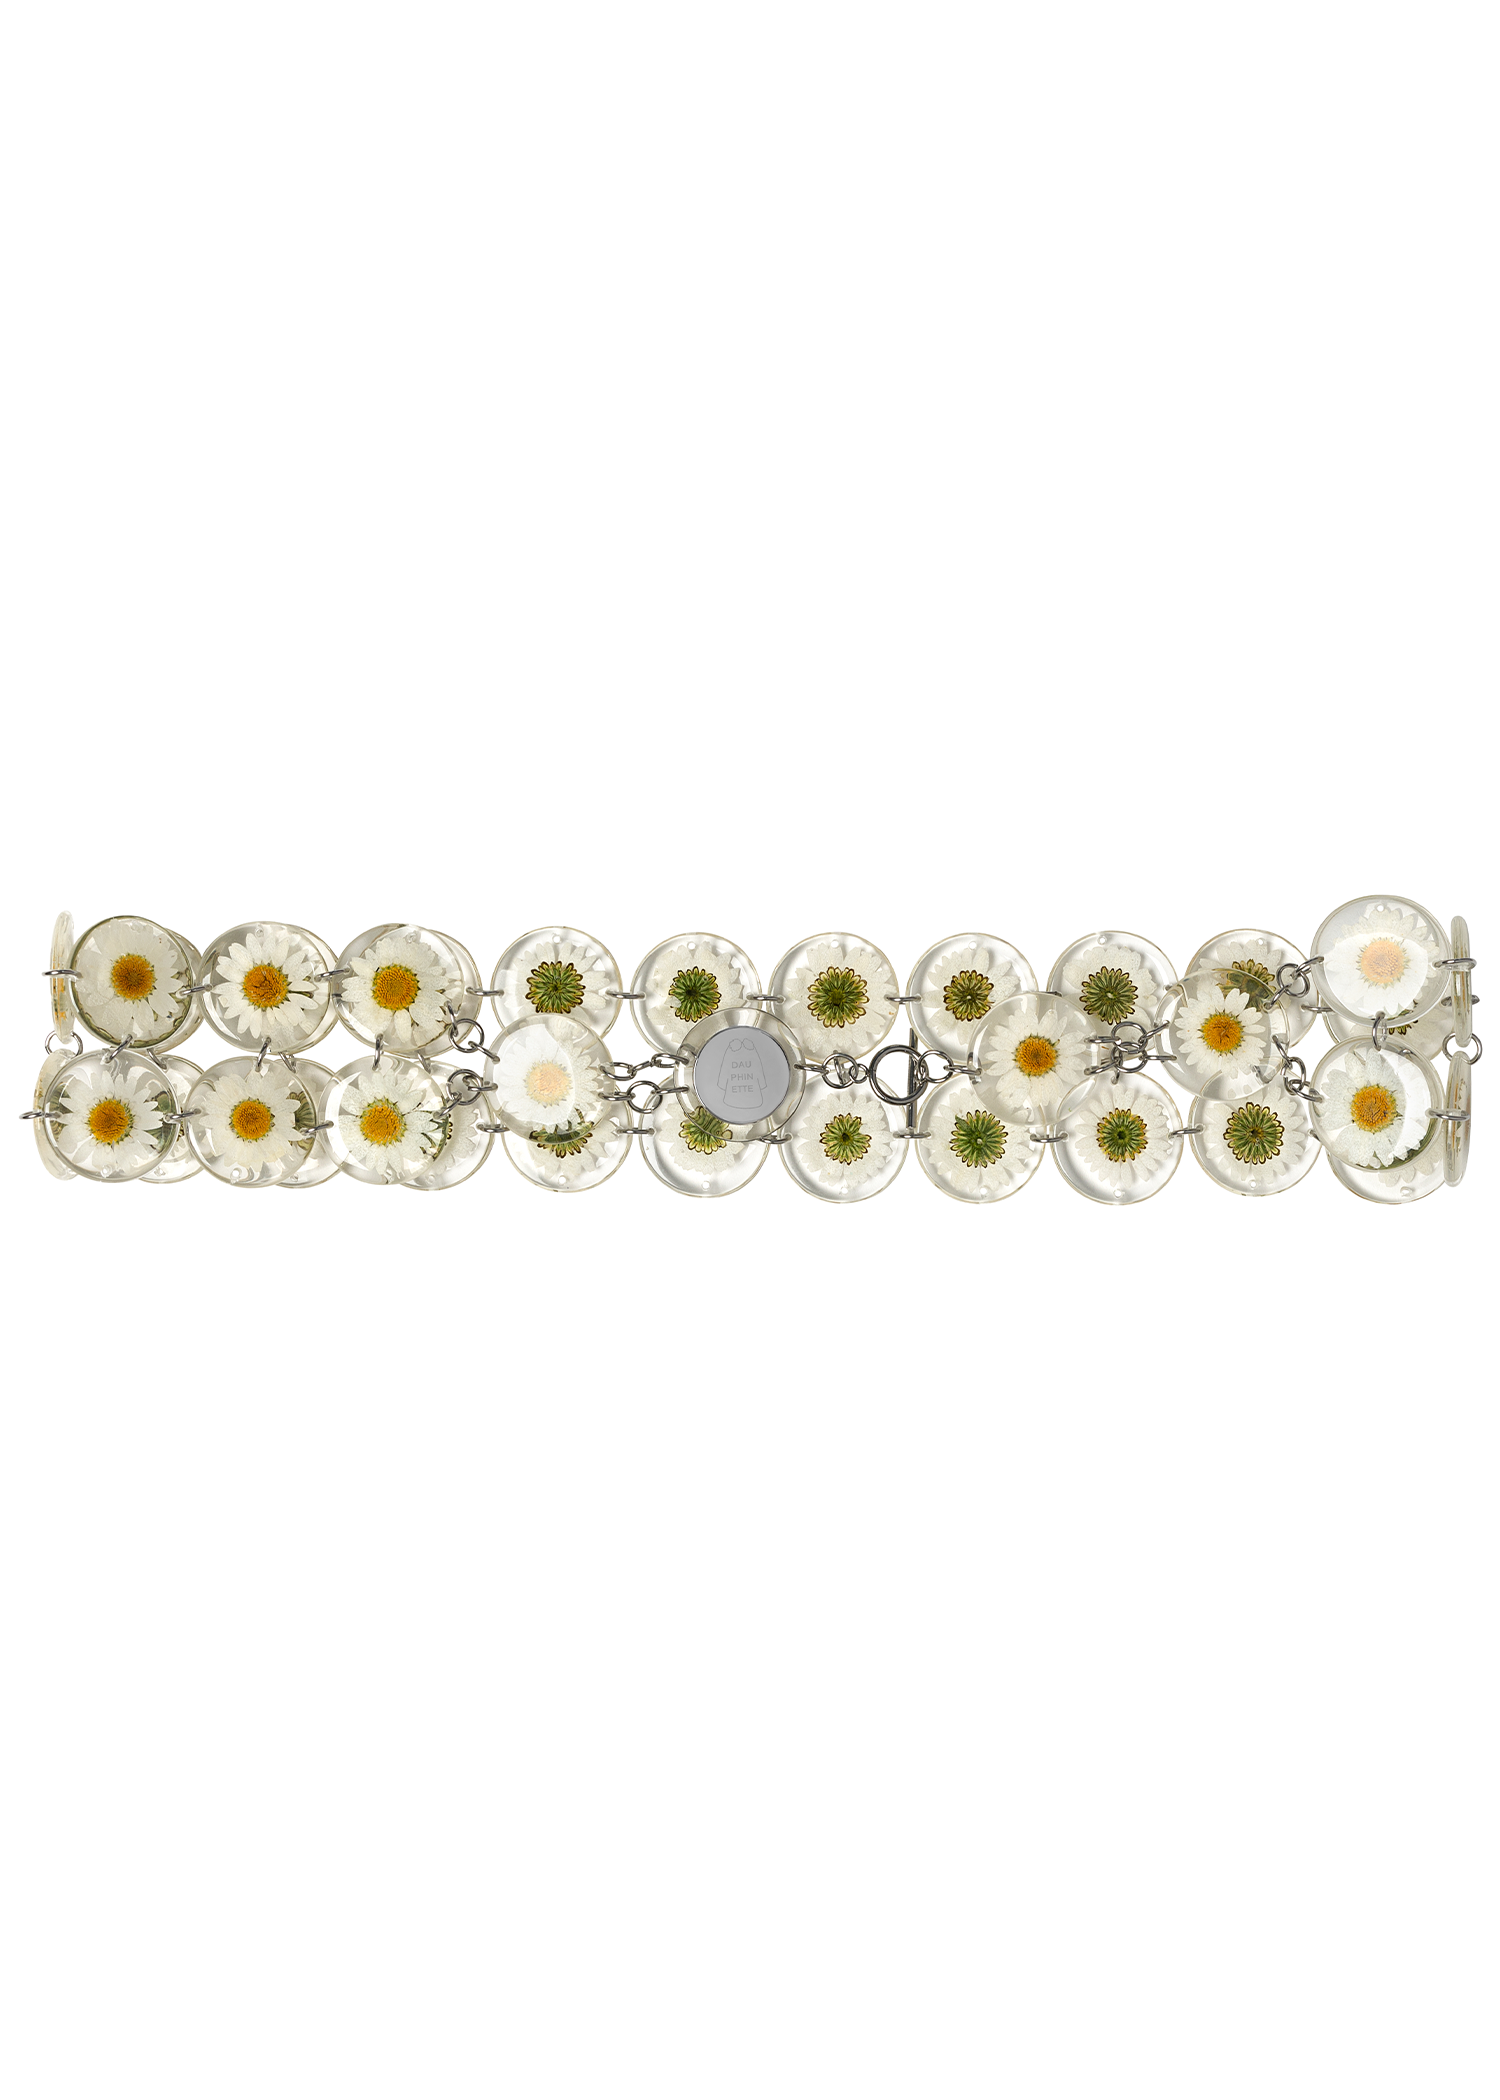 Chainmaille belt made of two rows of daisies preserved in round resin charms connected by silver jump rings.